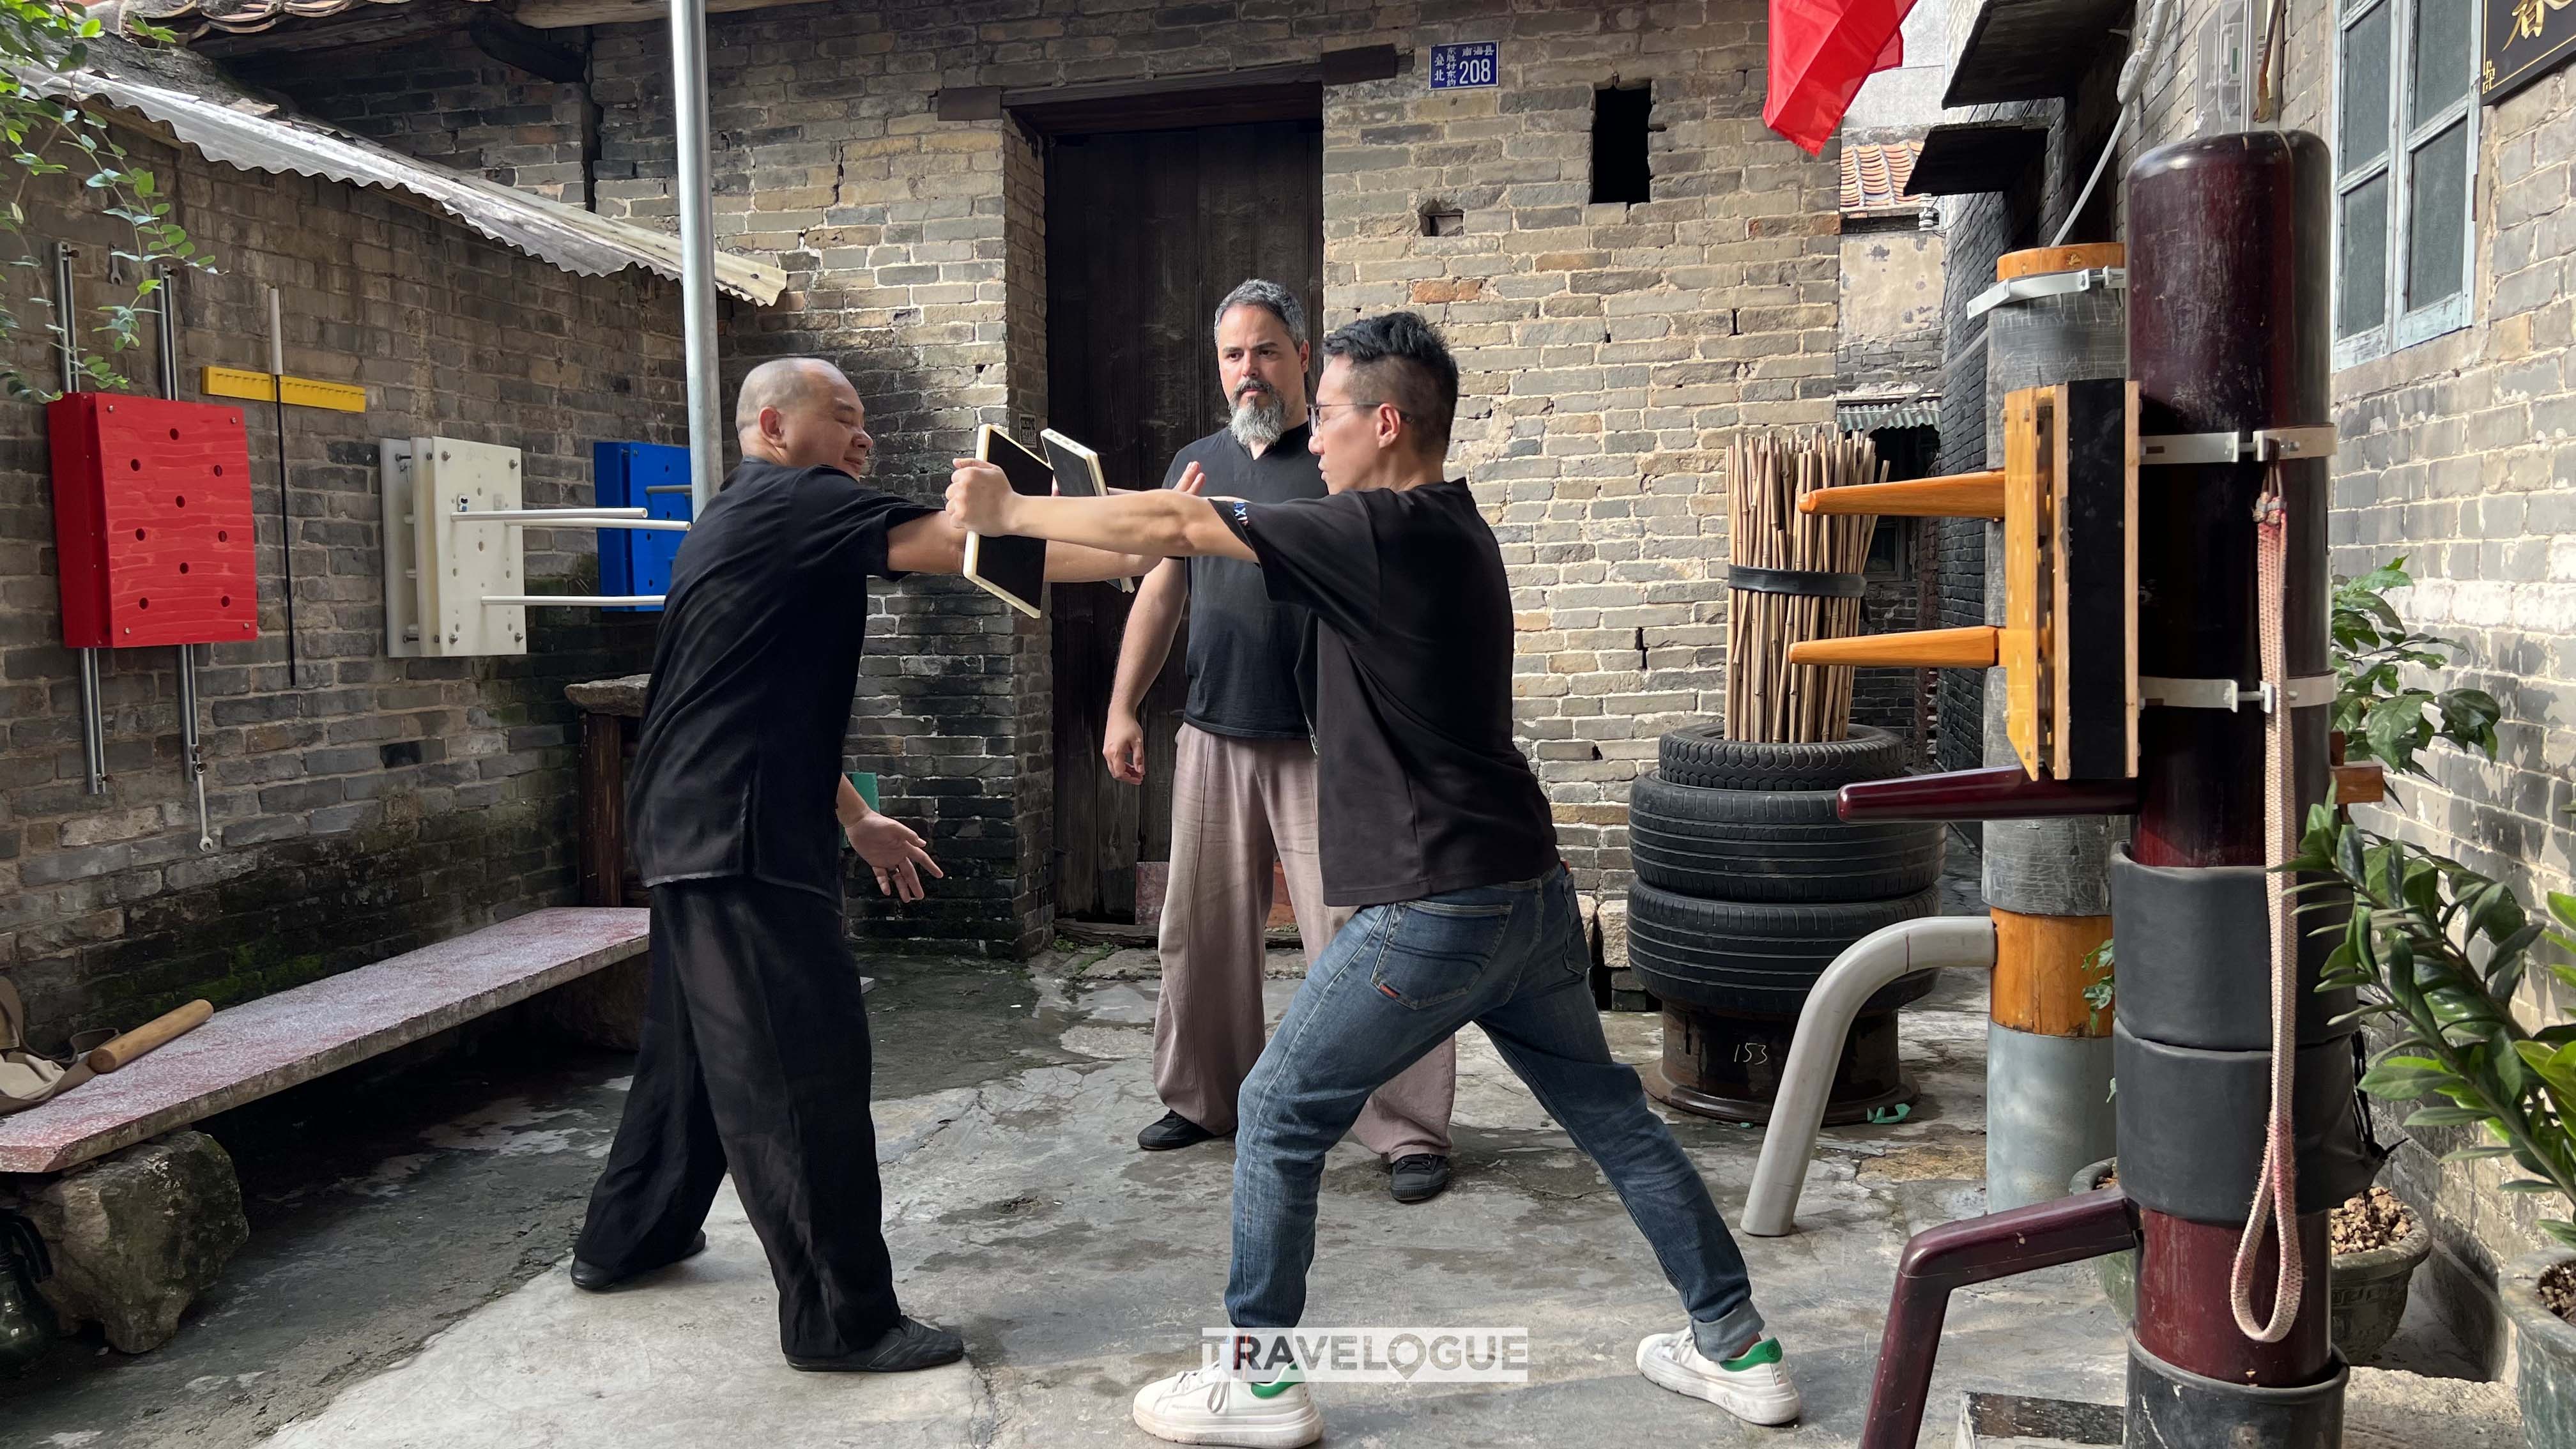 A Wing Chun enthusiast from abroad studies the snake-style Wing Chun in Foshan, south China's Guangdong Province. /CGTN